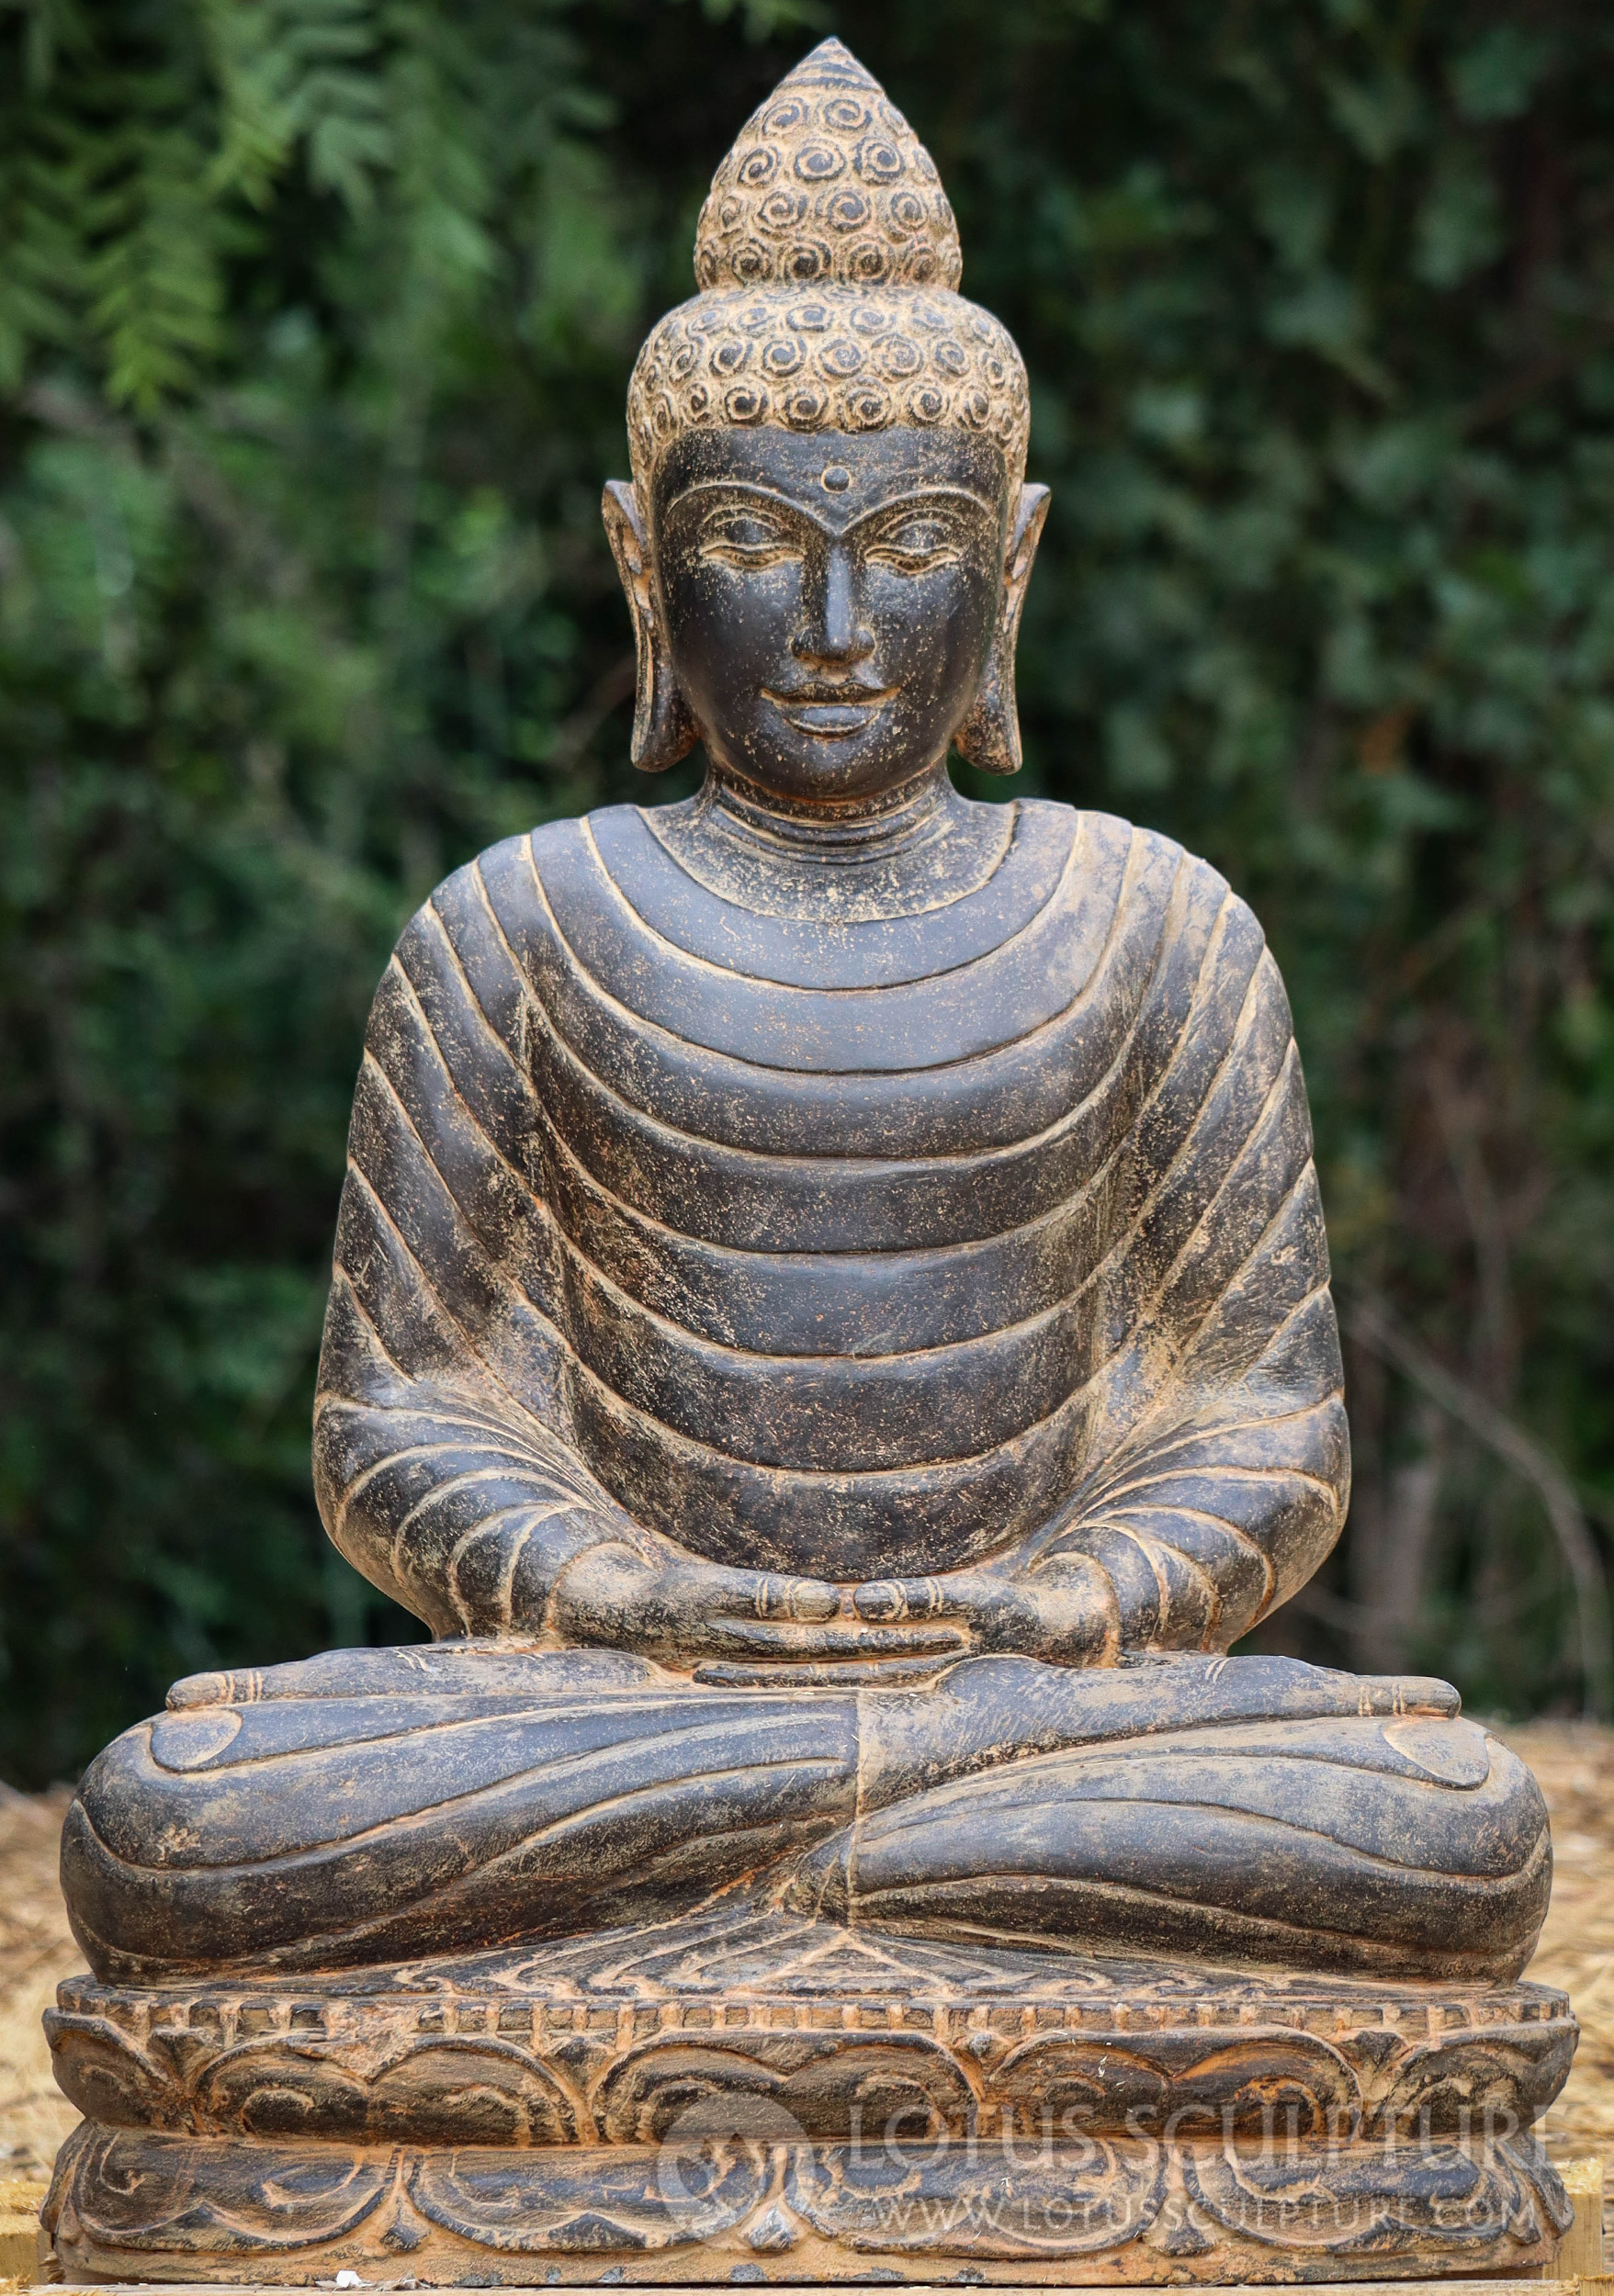 Colored Stone Meditating Buddha Statue in Robes Garden Sculpture for ...